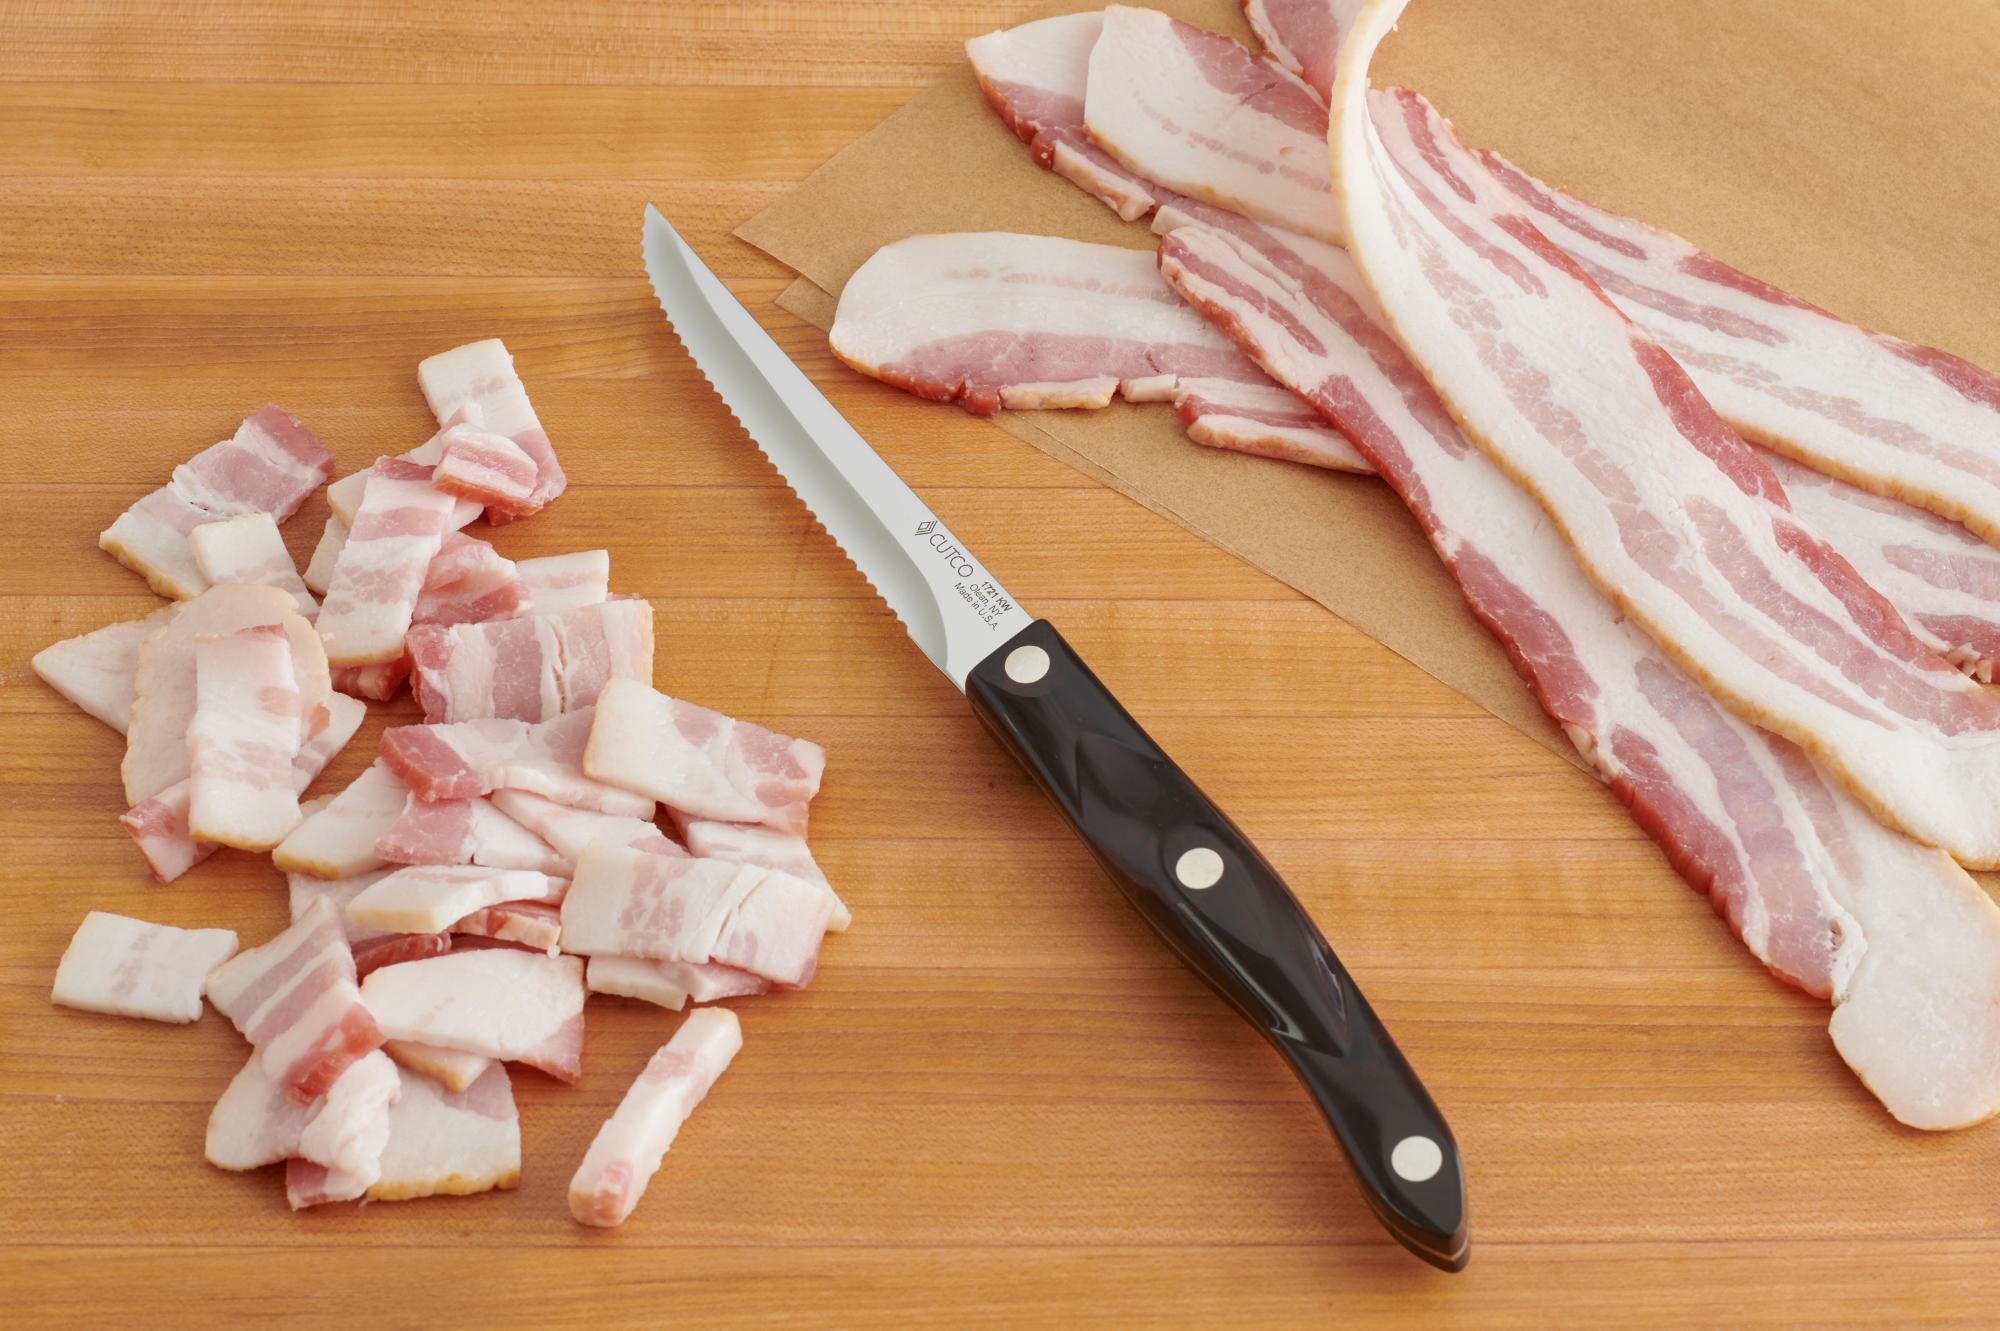 Use a Trimmer to cut the bacon.